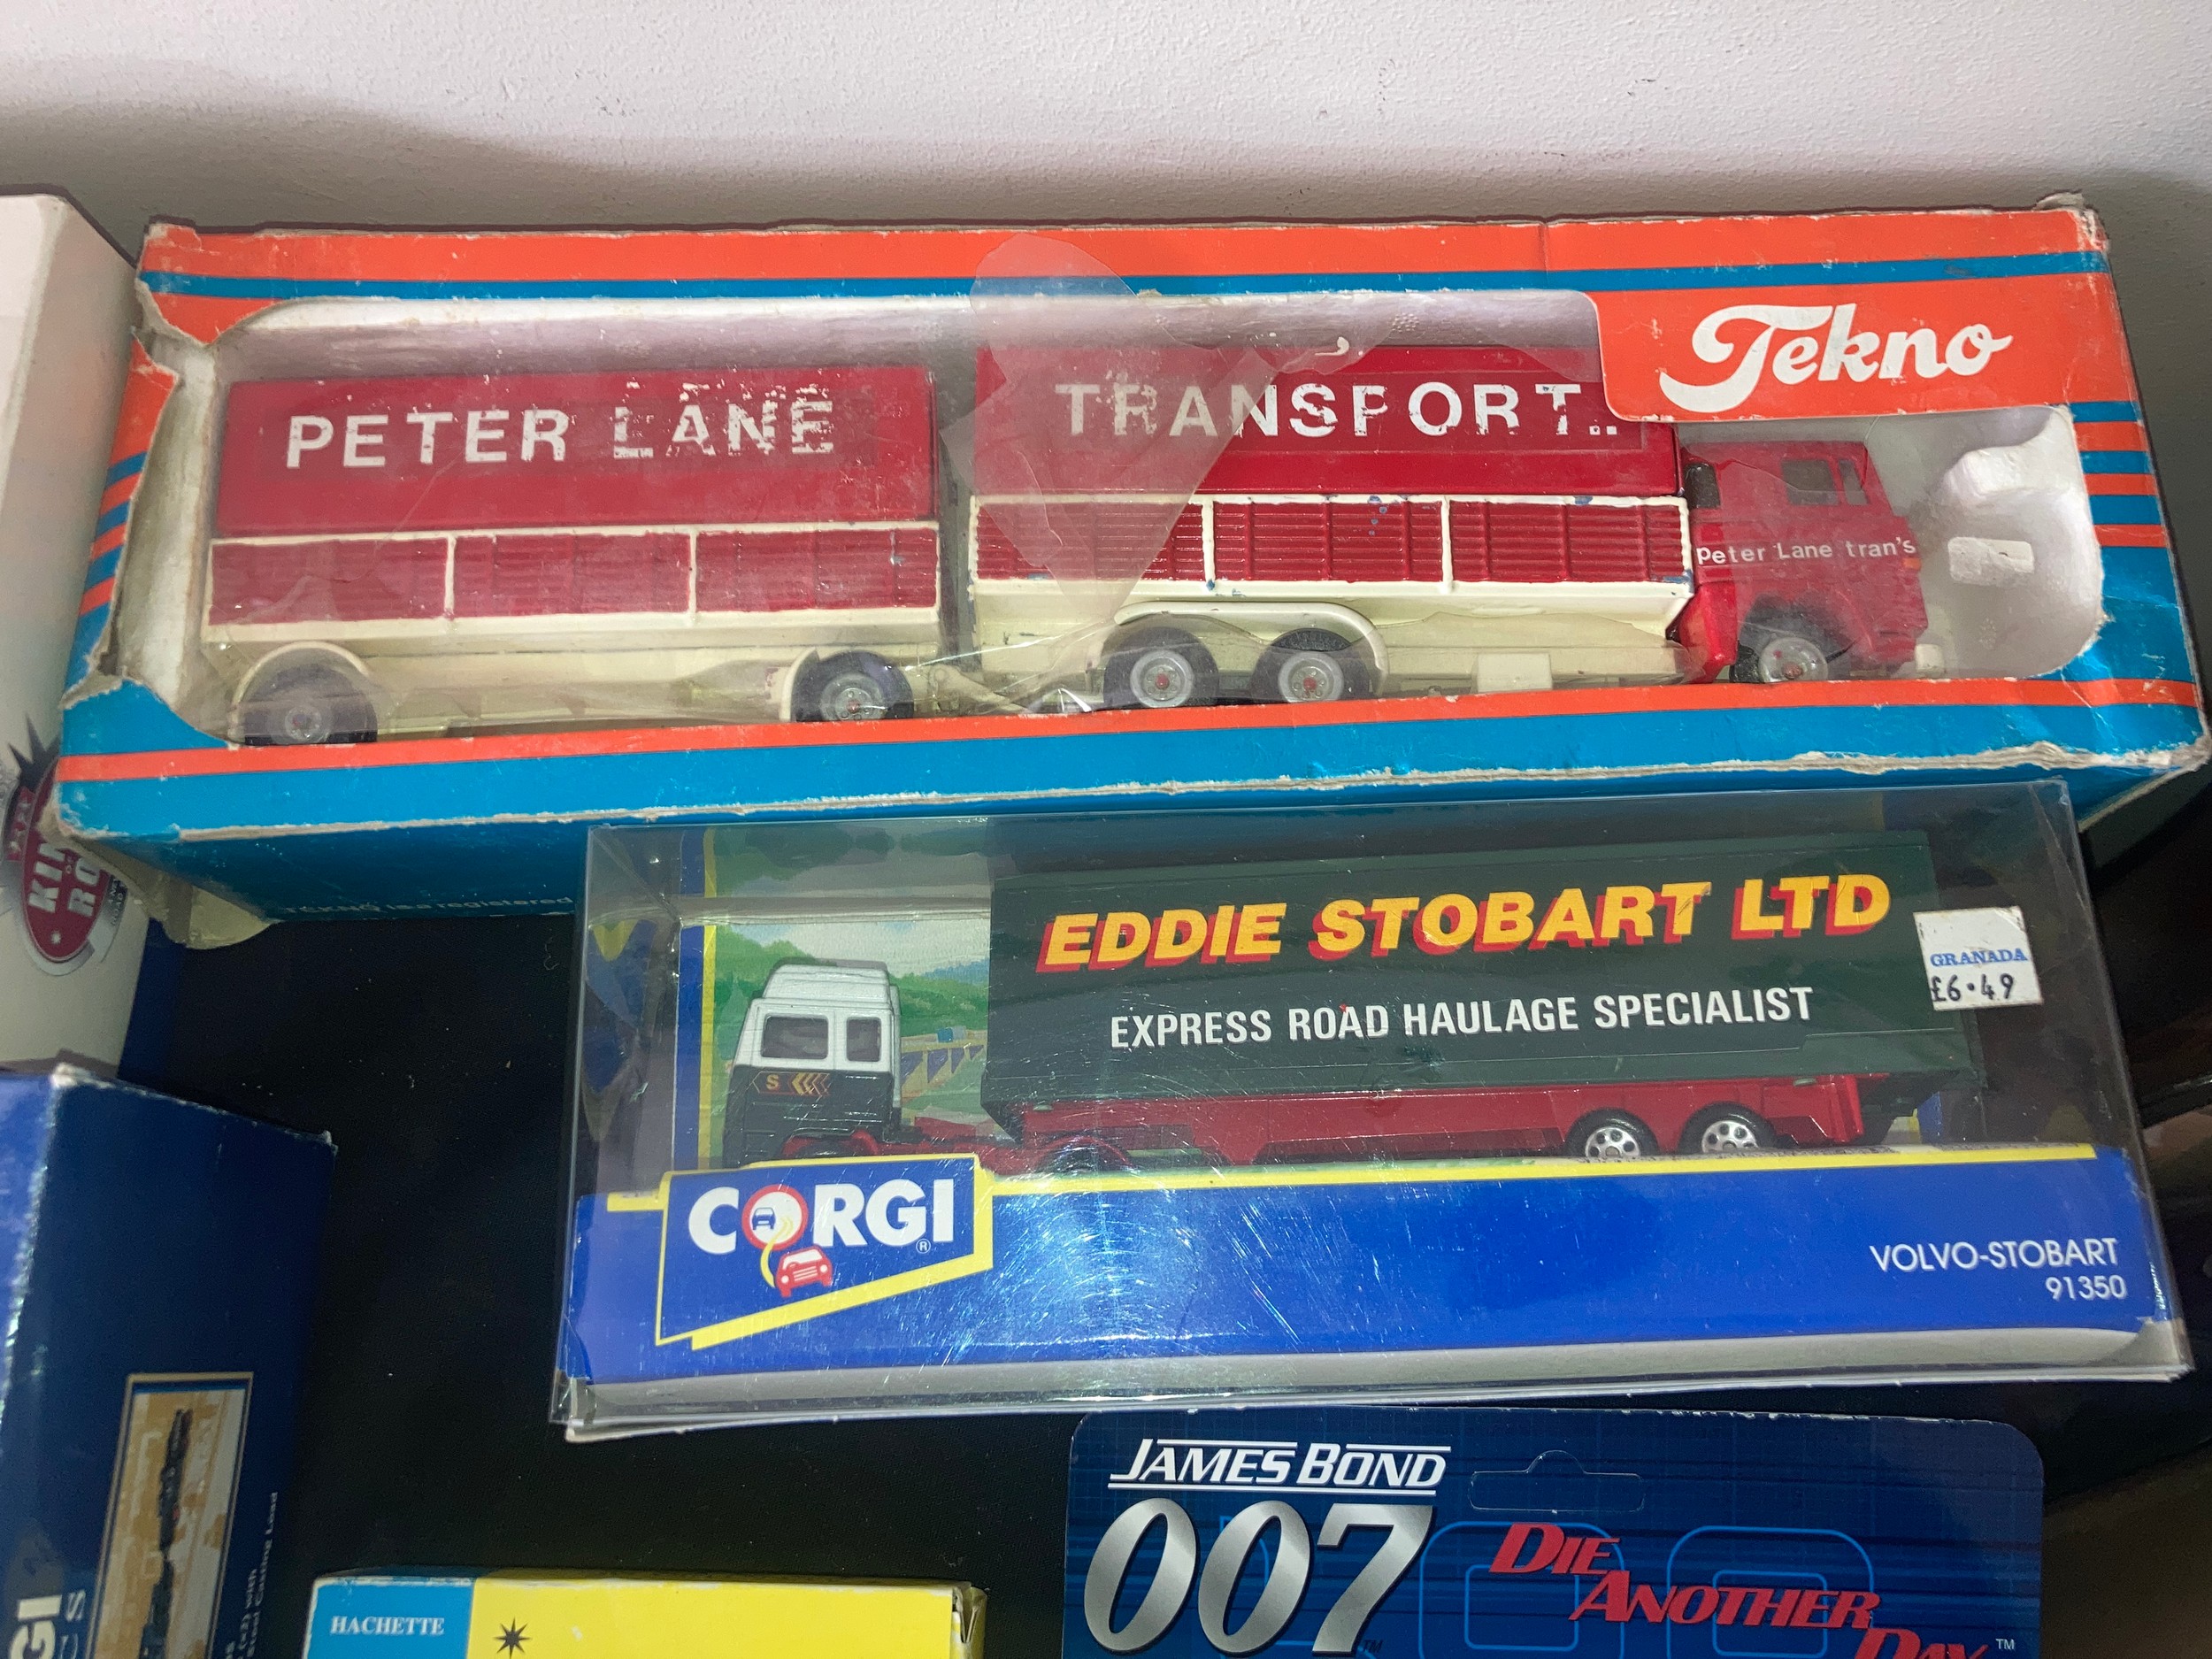 Diecast boxed models to include Corgis, Corgi James Bond, Kings of the Road, Tekno etc.Condition - Image 4 of 6